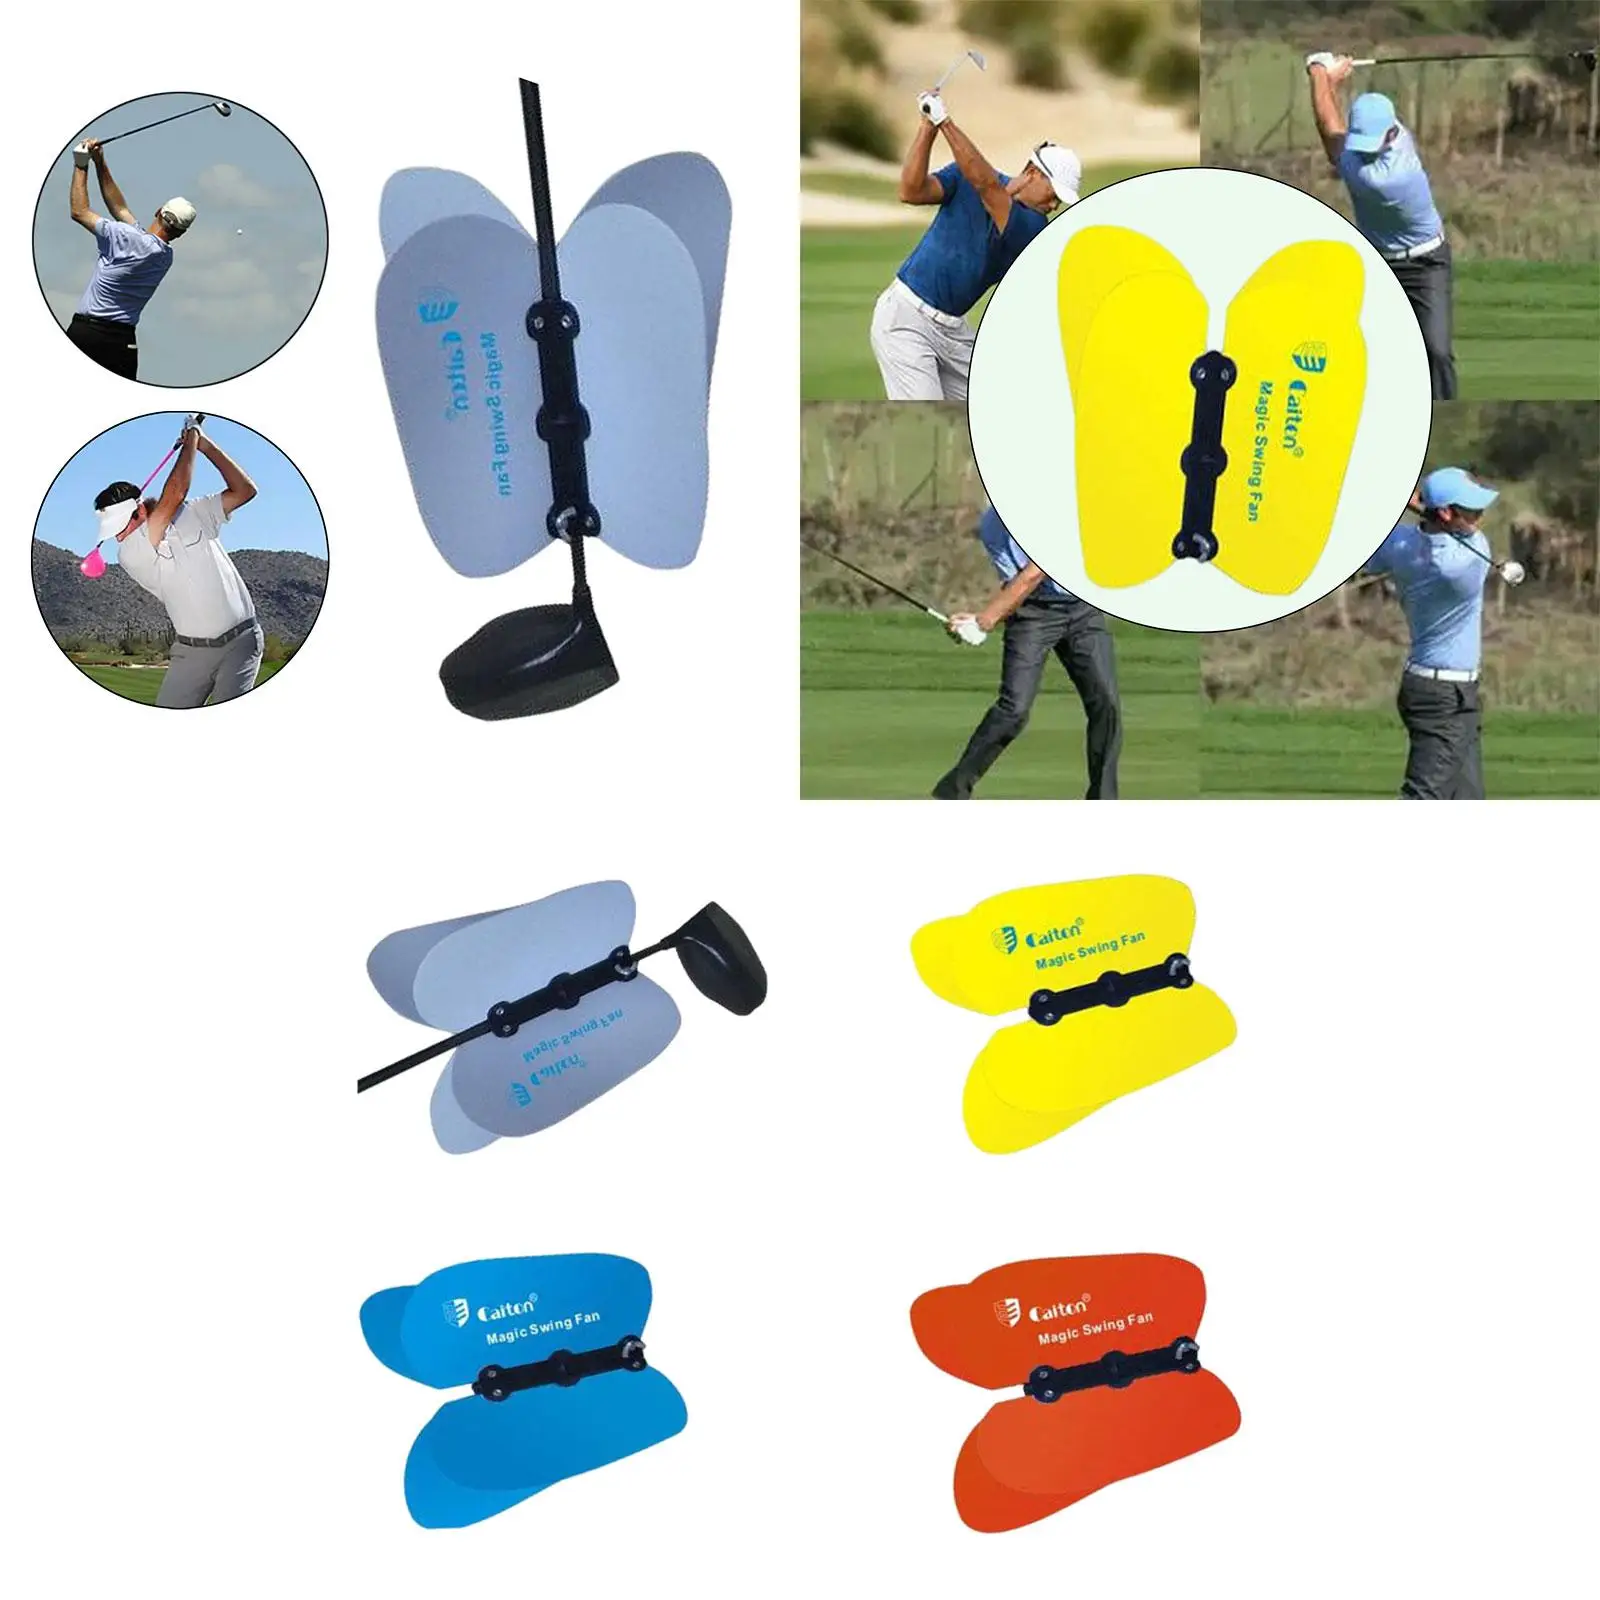 Golf Swing Fan Wind Resistance Equipment Trainer for Golfers of All Skill Levels